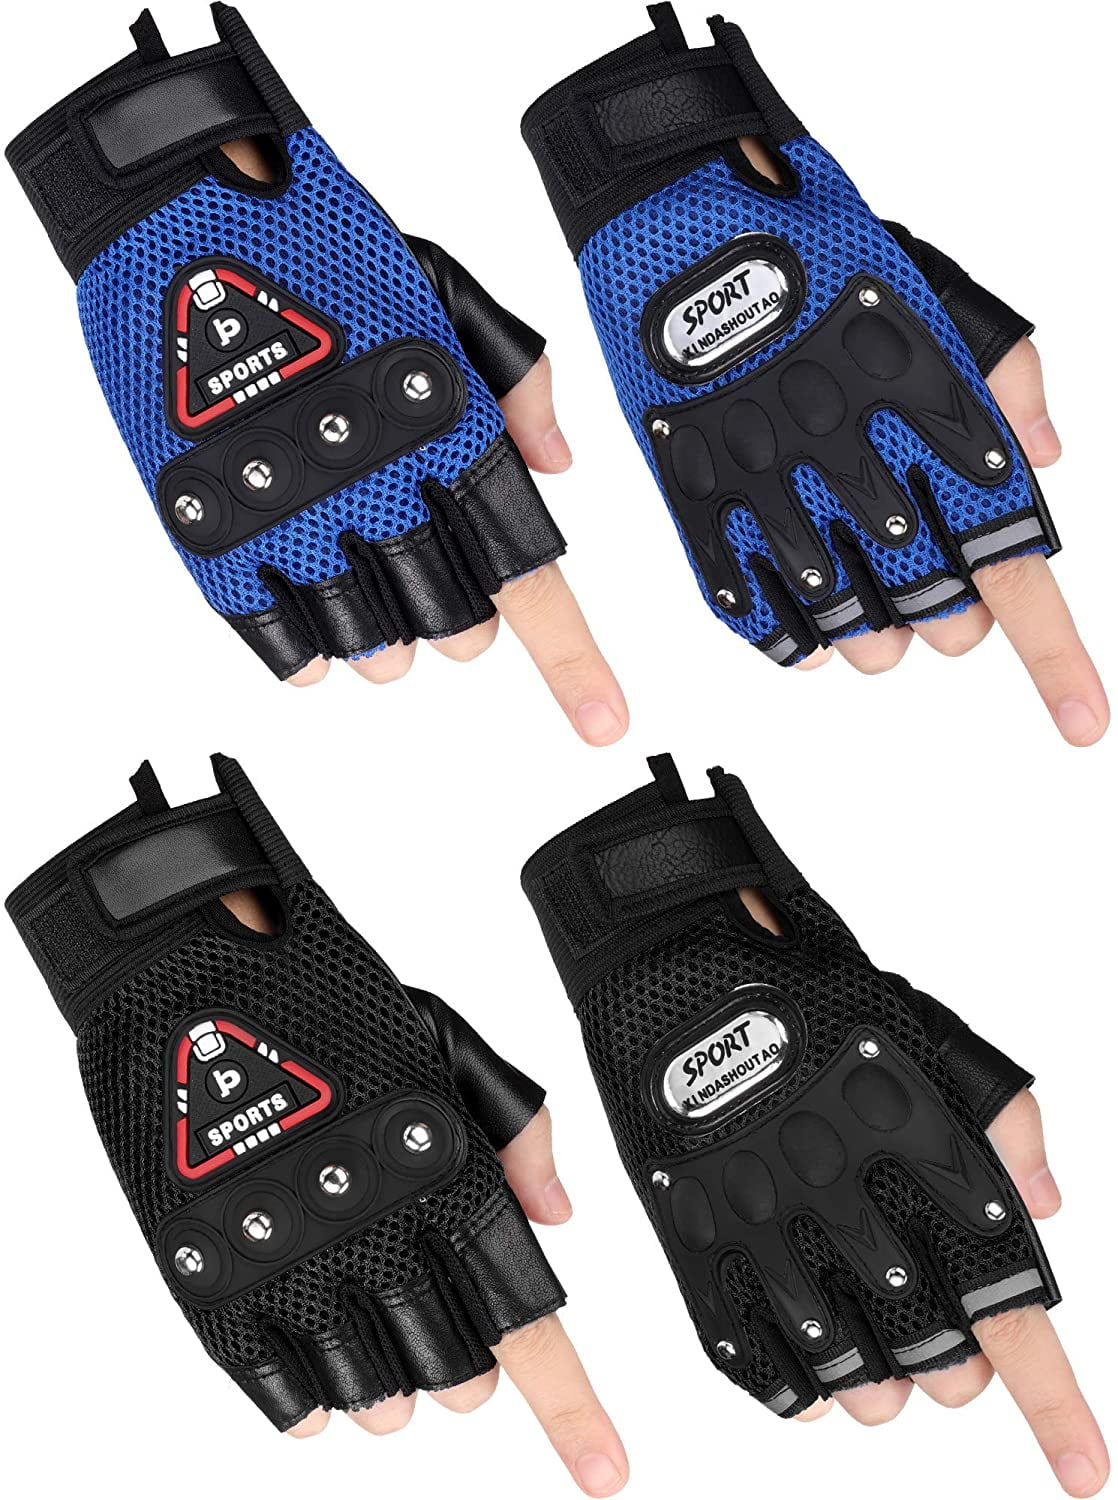 Outdoor Women Men Bicycle Riding Gloves Anti-slip Half Finger Soft Breathable 